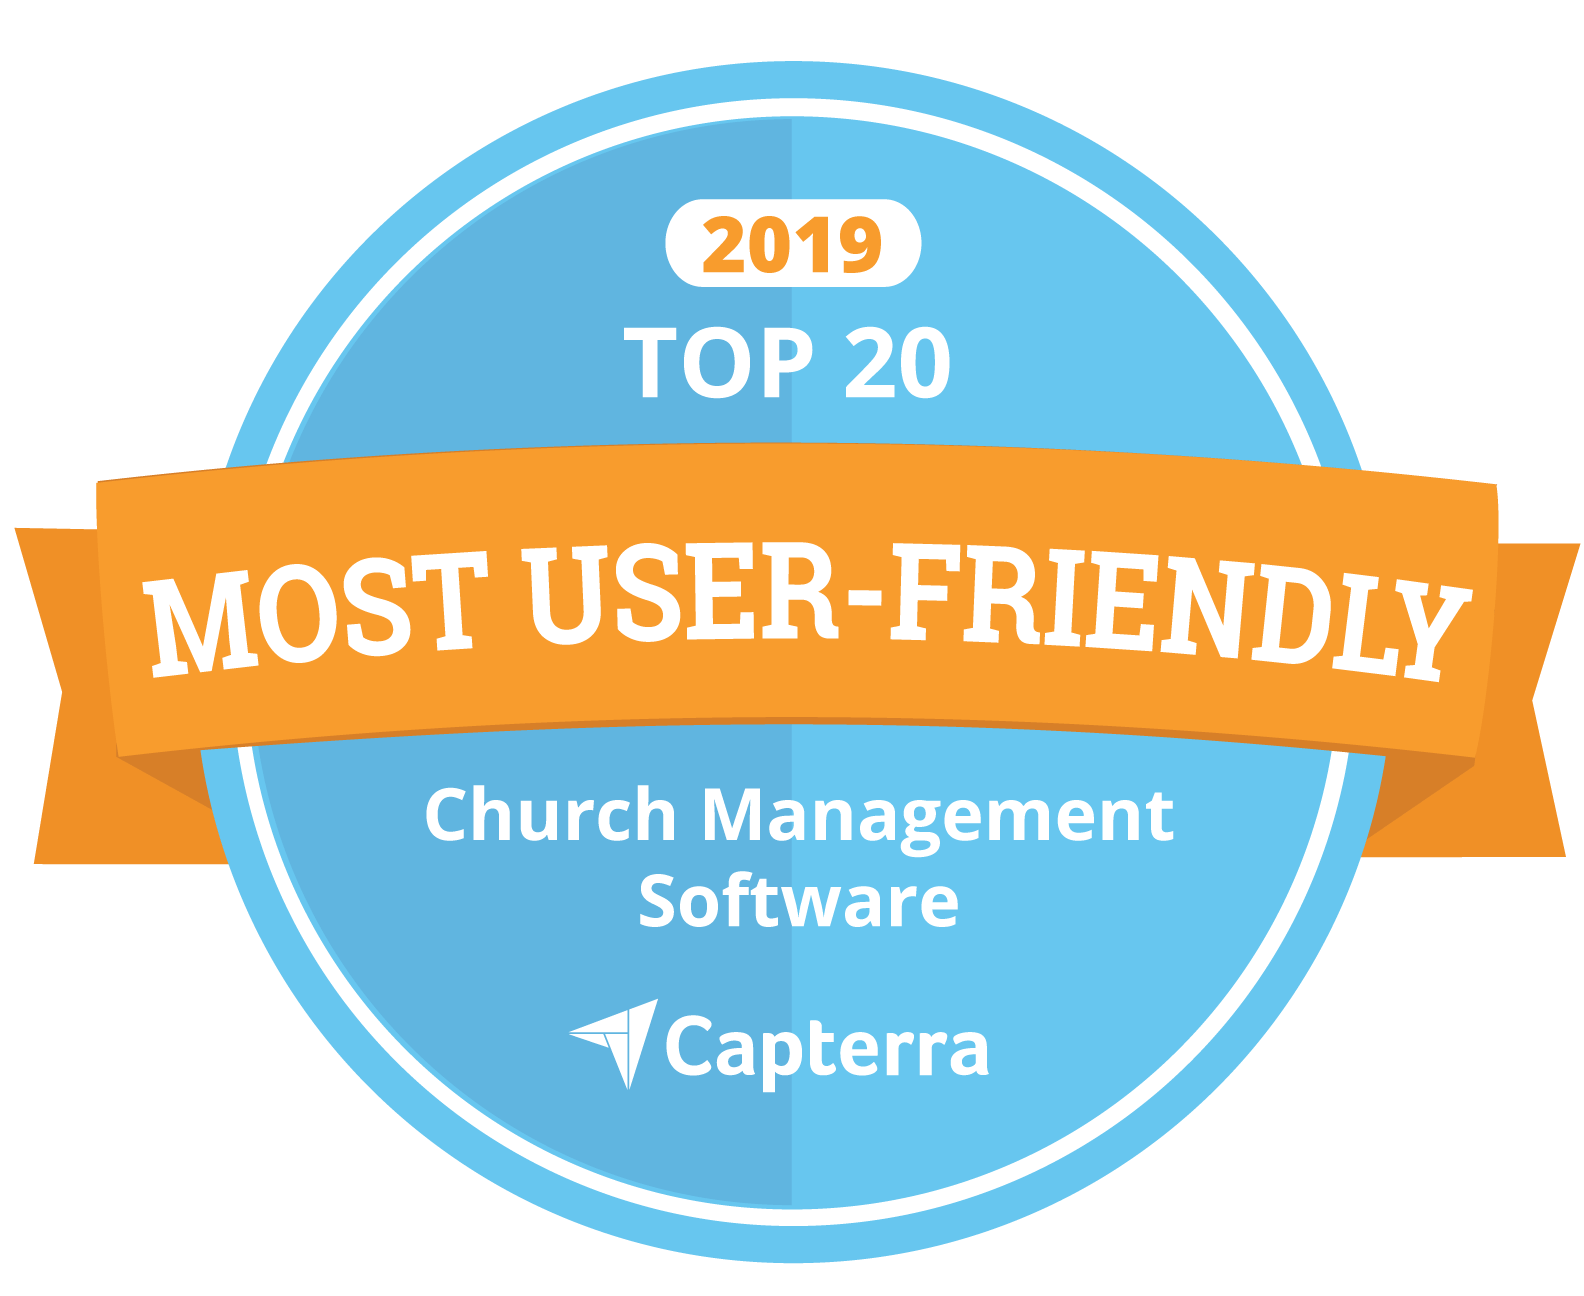 Voted One of the Most User-Friendly Church Management Softwares by Capterra Reviews